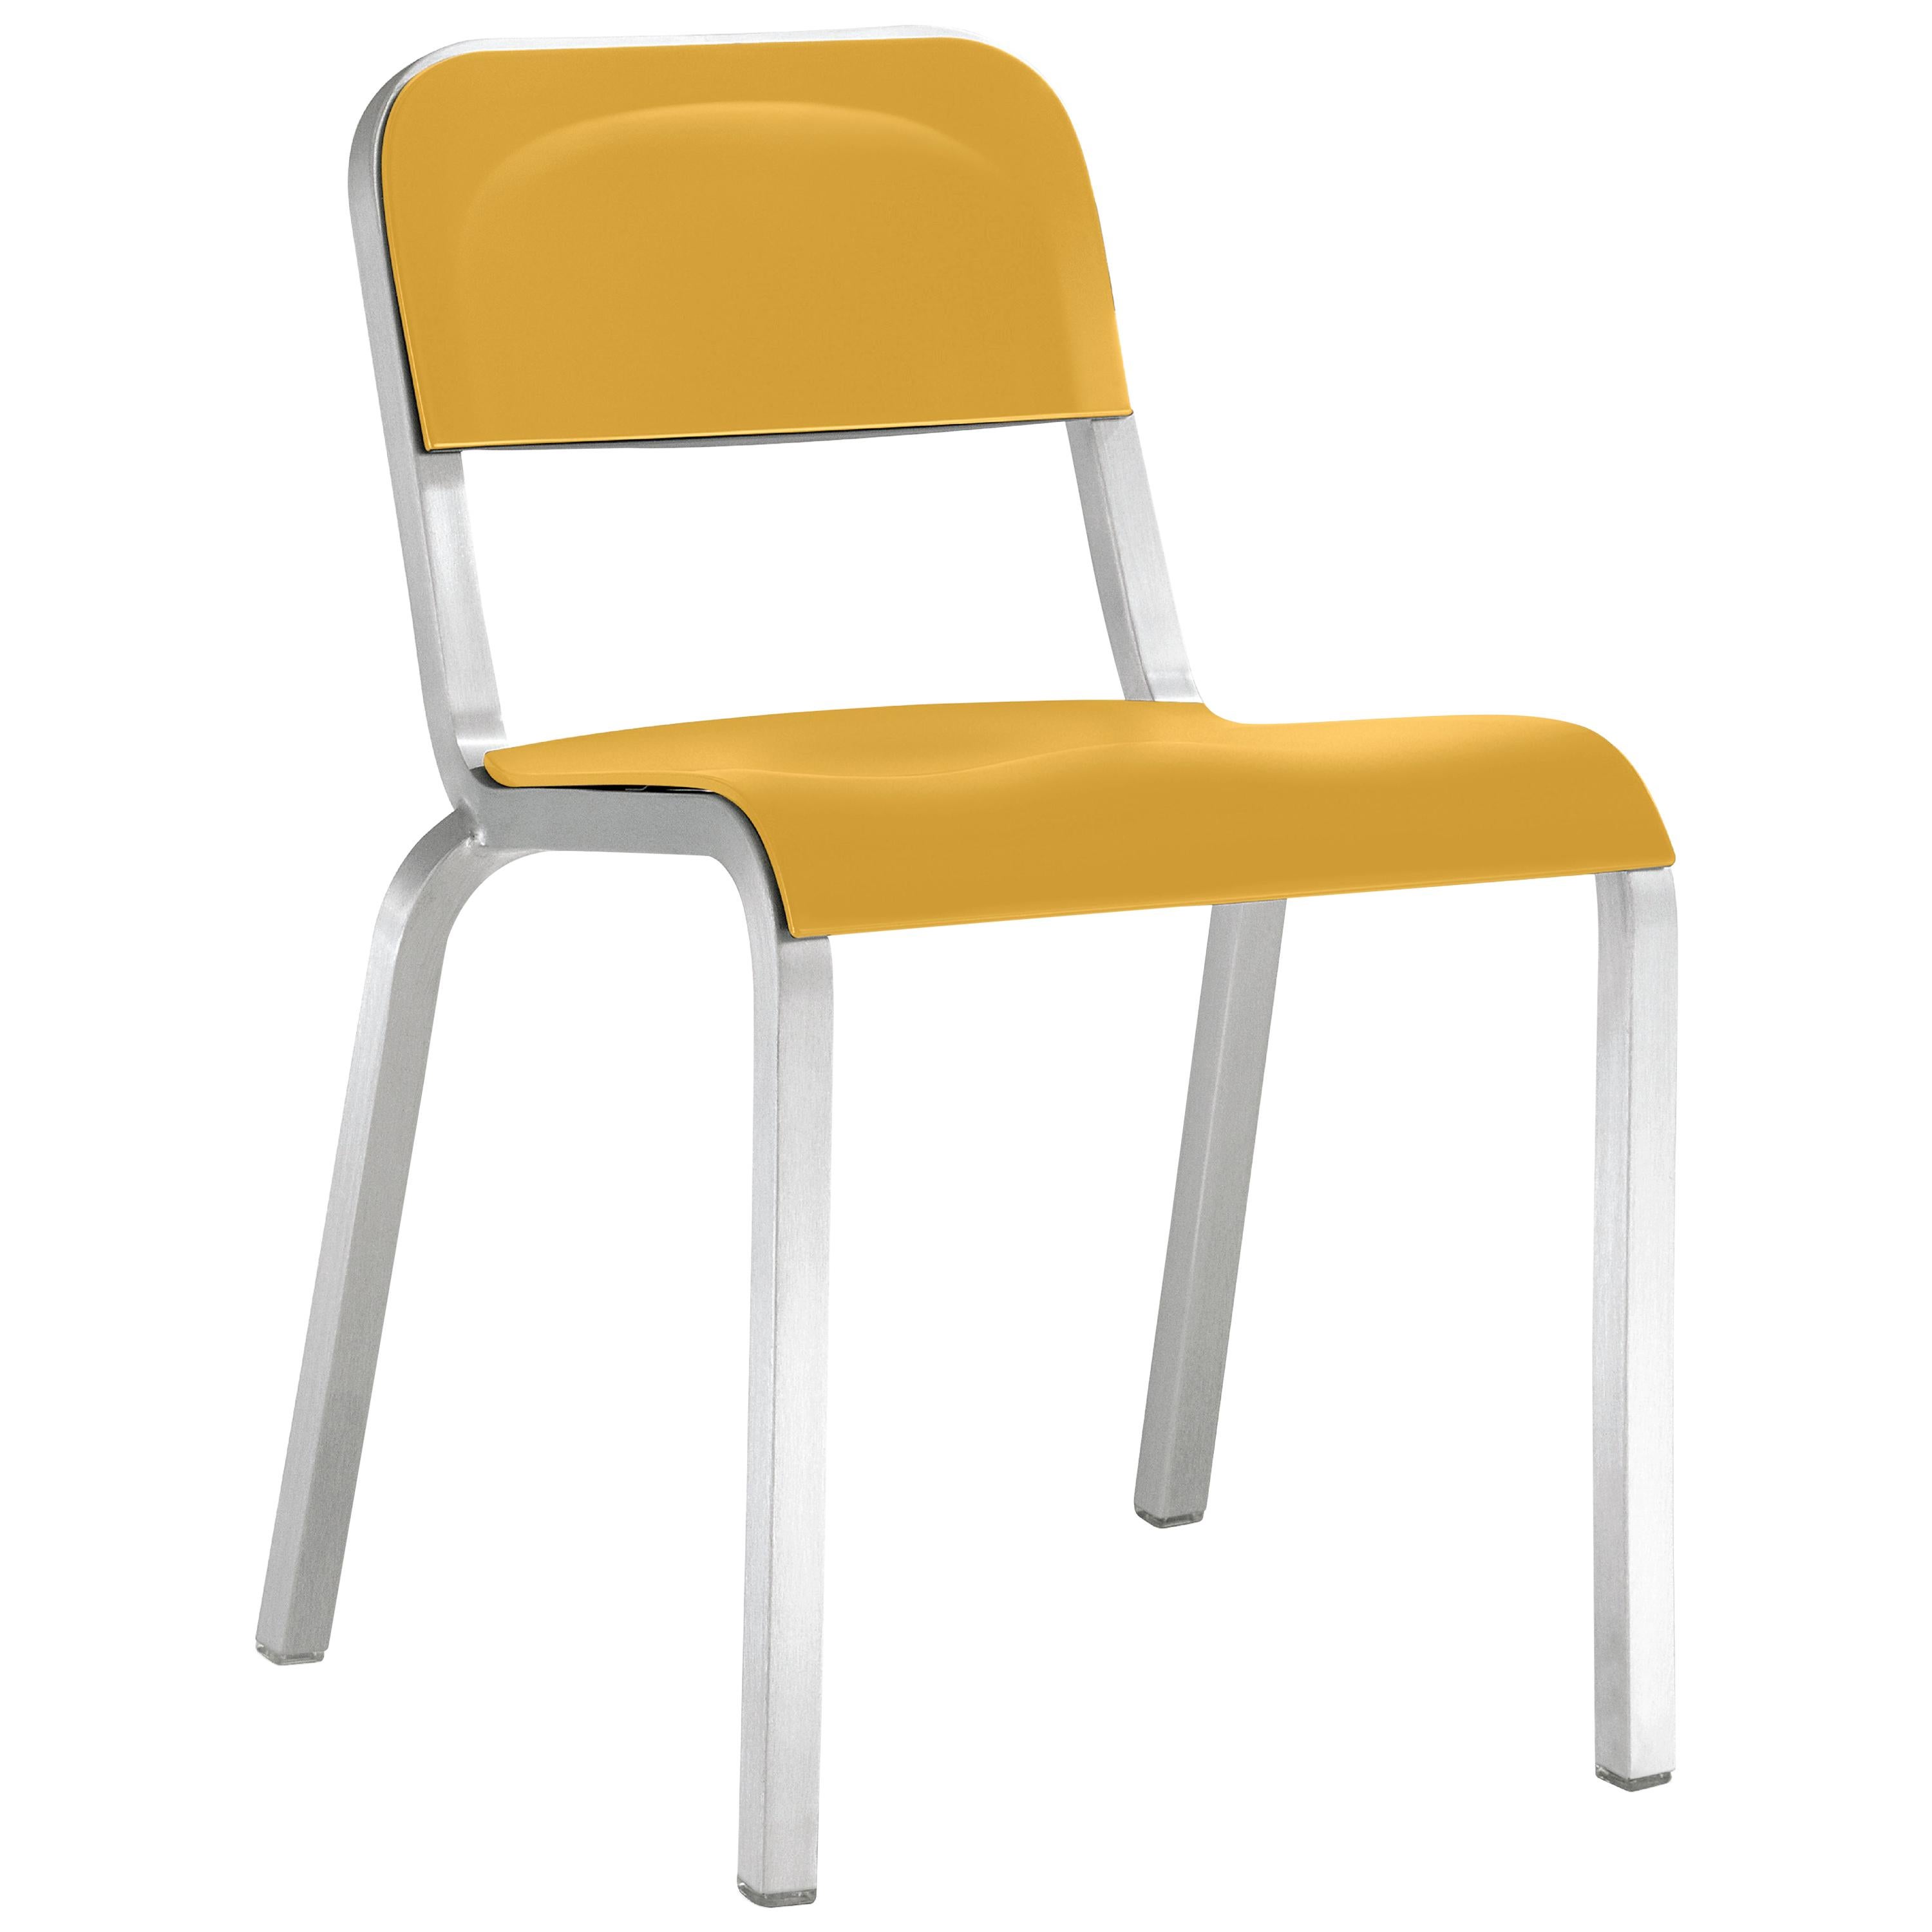 Emeco 1951 Aluminum Stacking Chair with Yellow Seat by Adrian Van Hooydonk